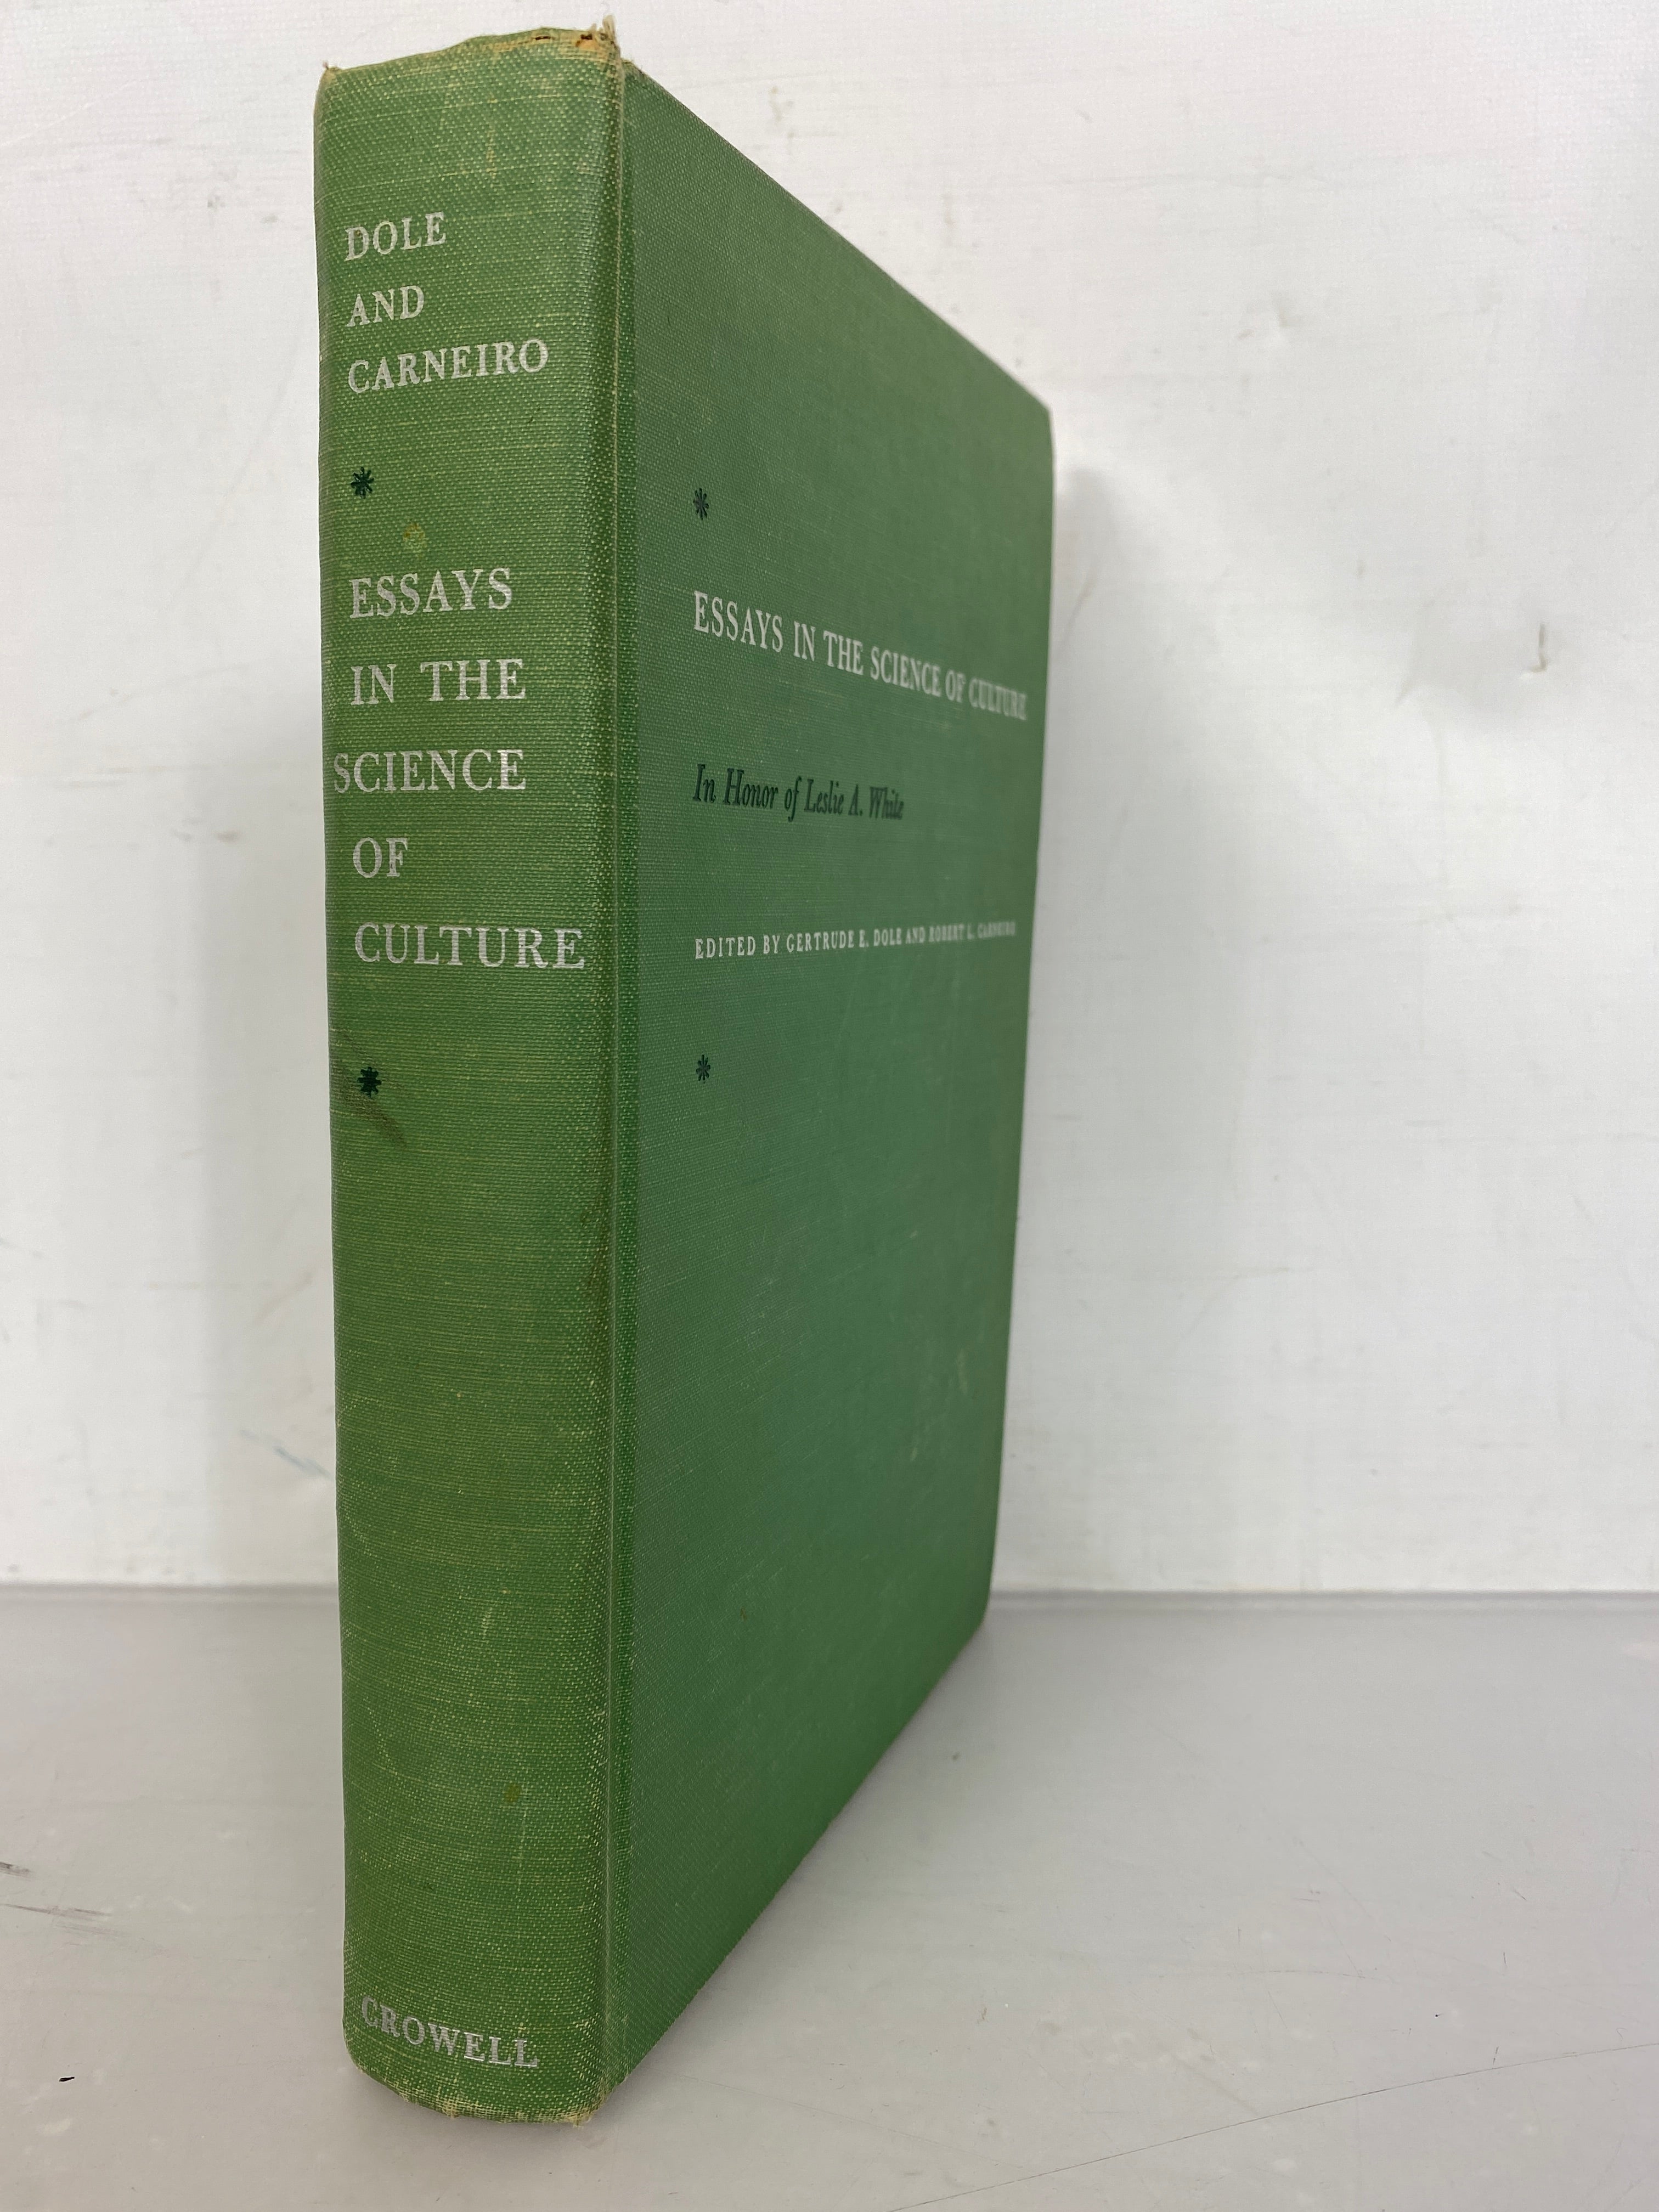 Essays in the Science of Culture in Honor of Leslie A. White by Dole and Carneiro 1960 HC